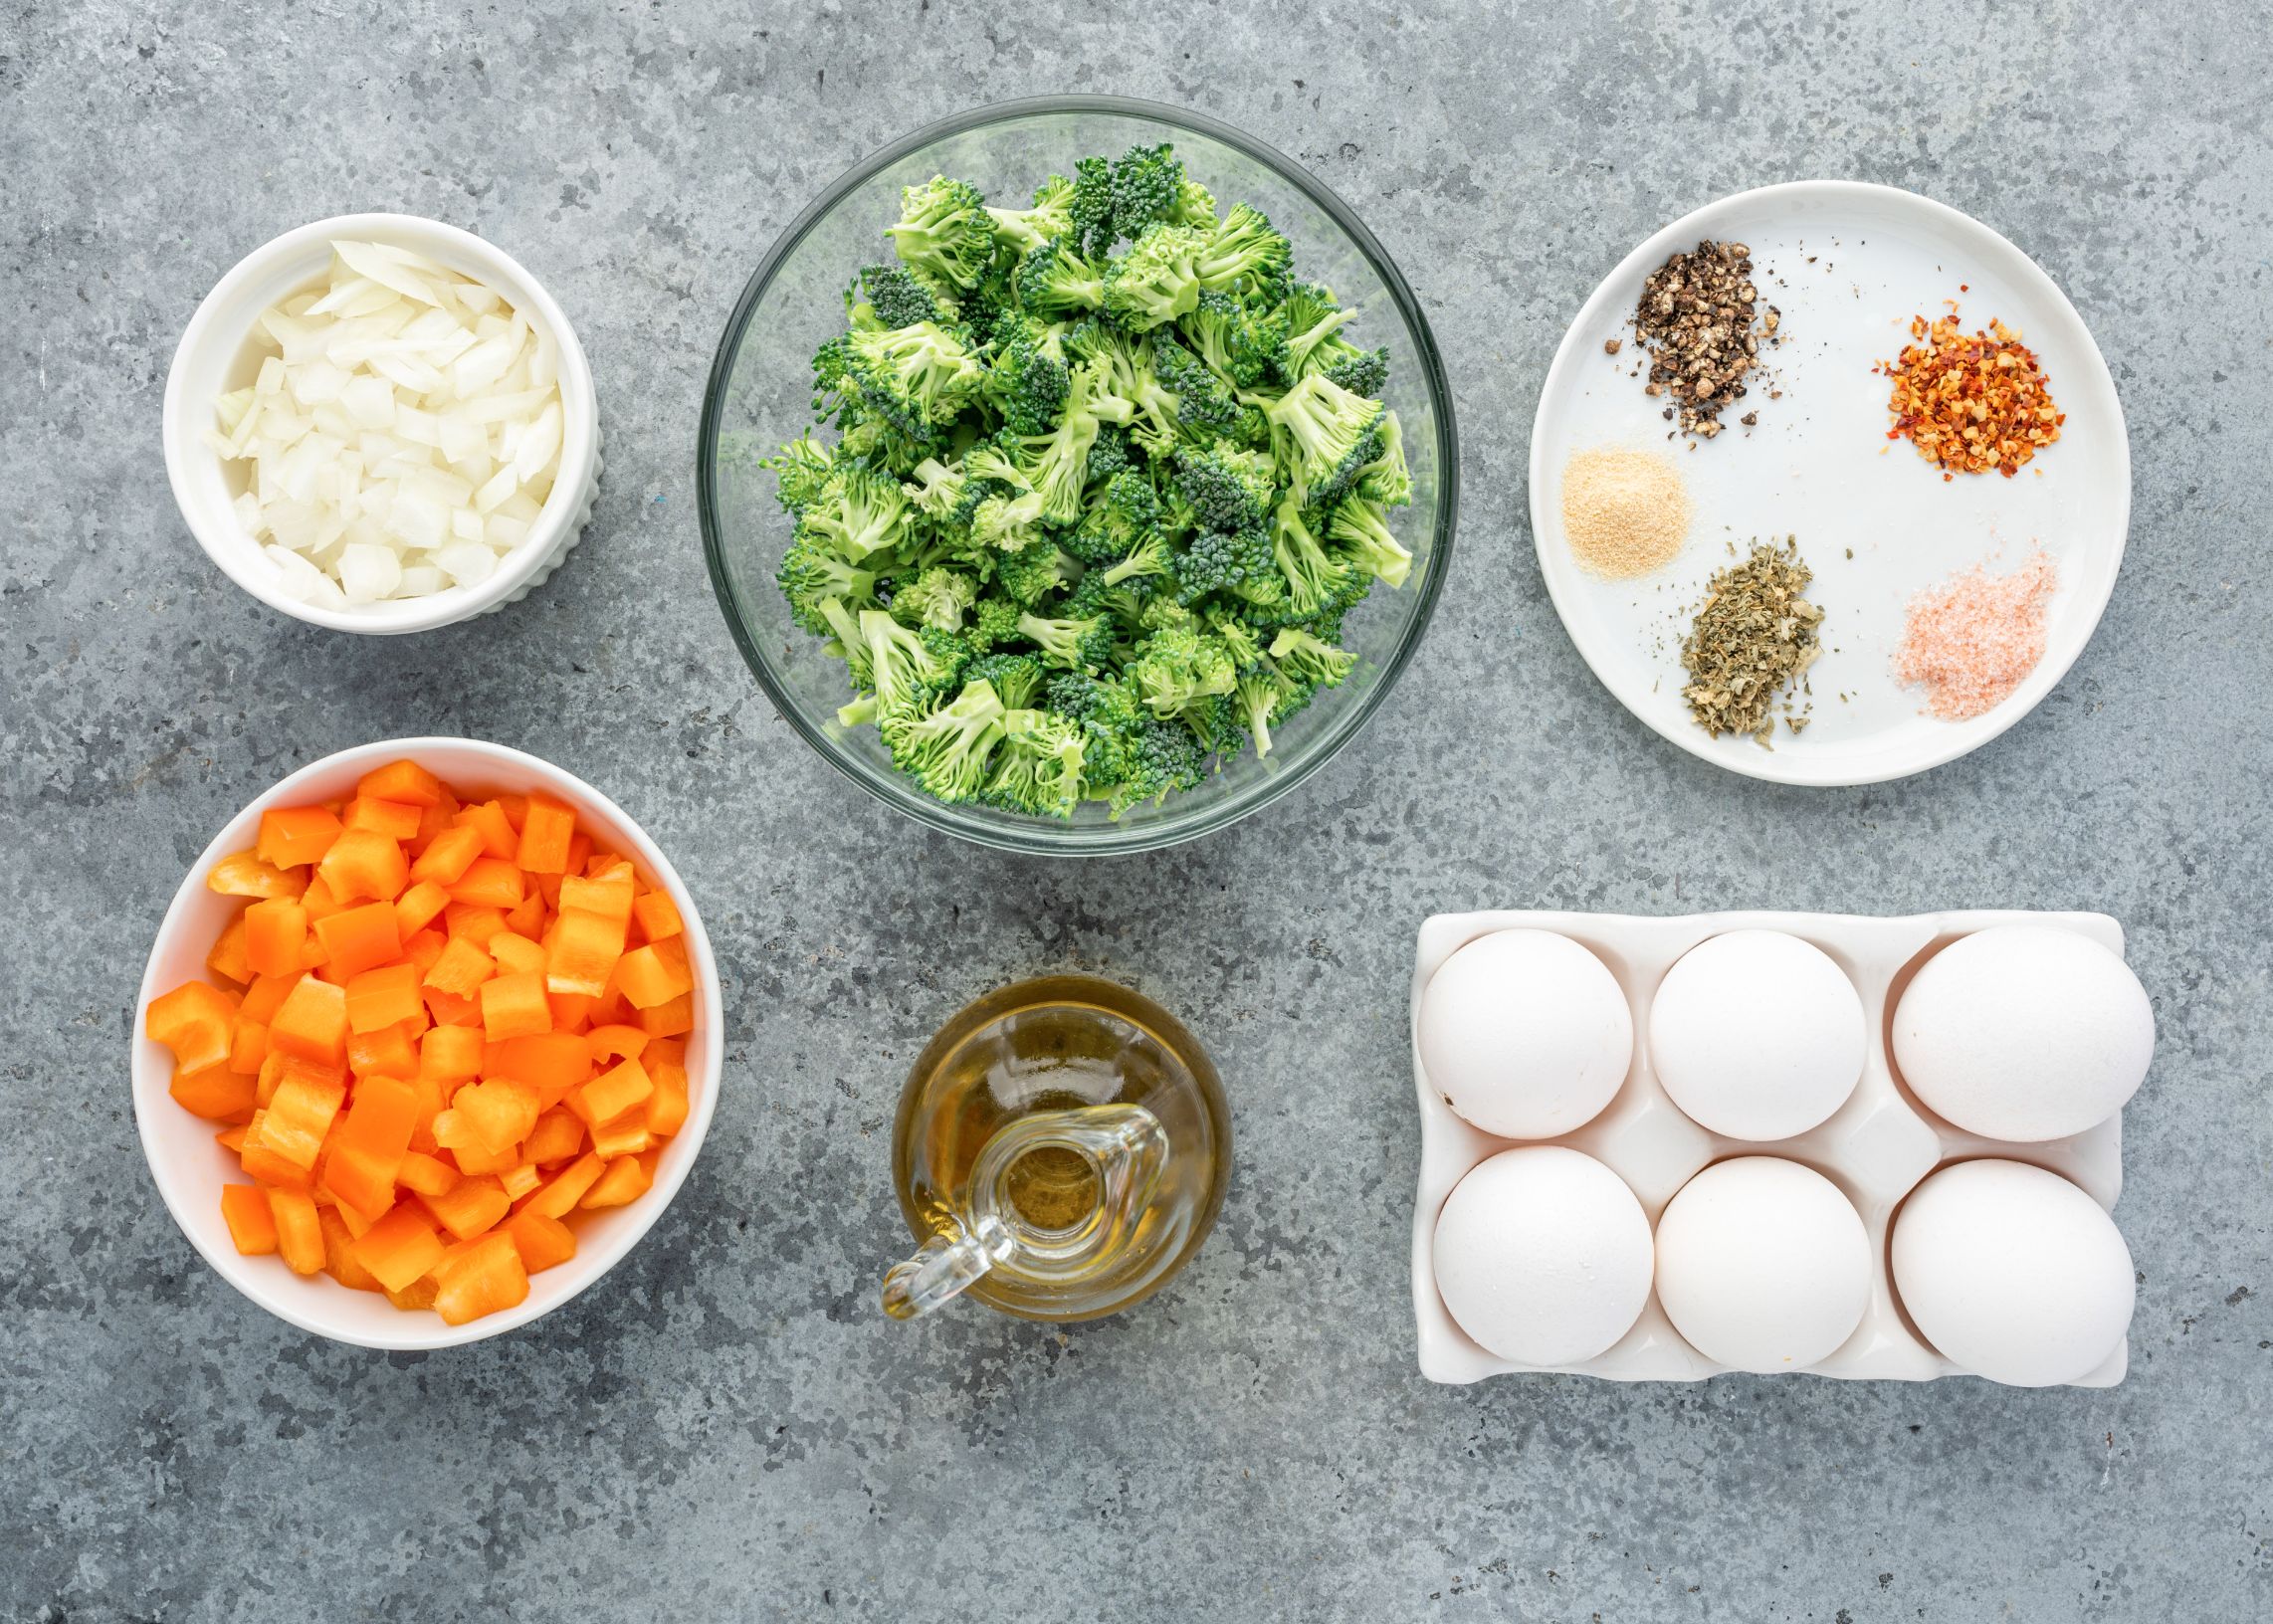 Eggs, chopped bell pepper, broccoli, onion and spices divided into bowls.